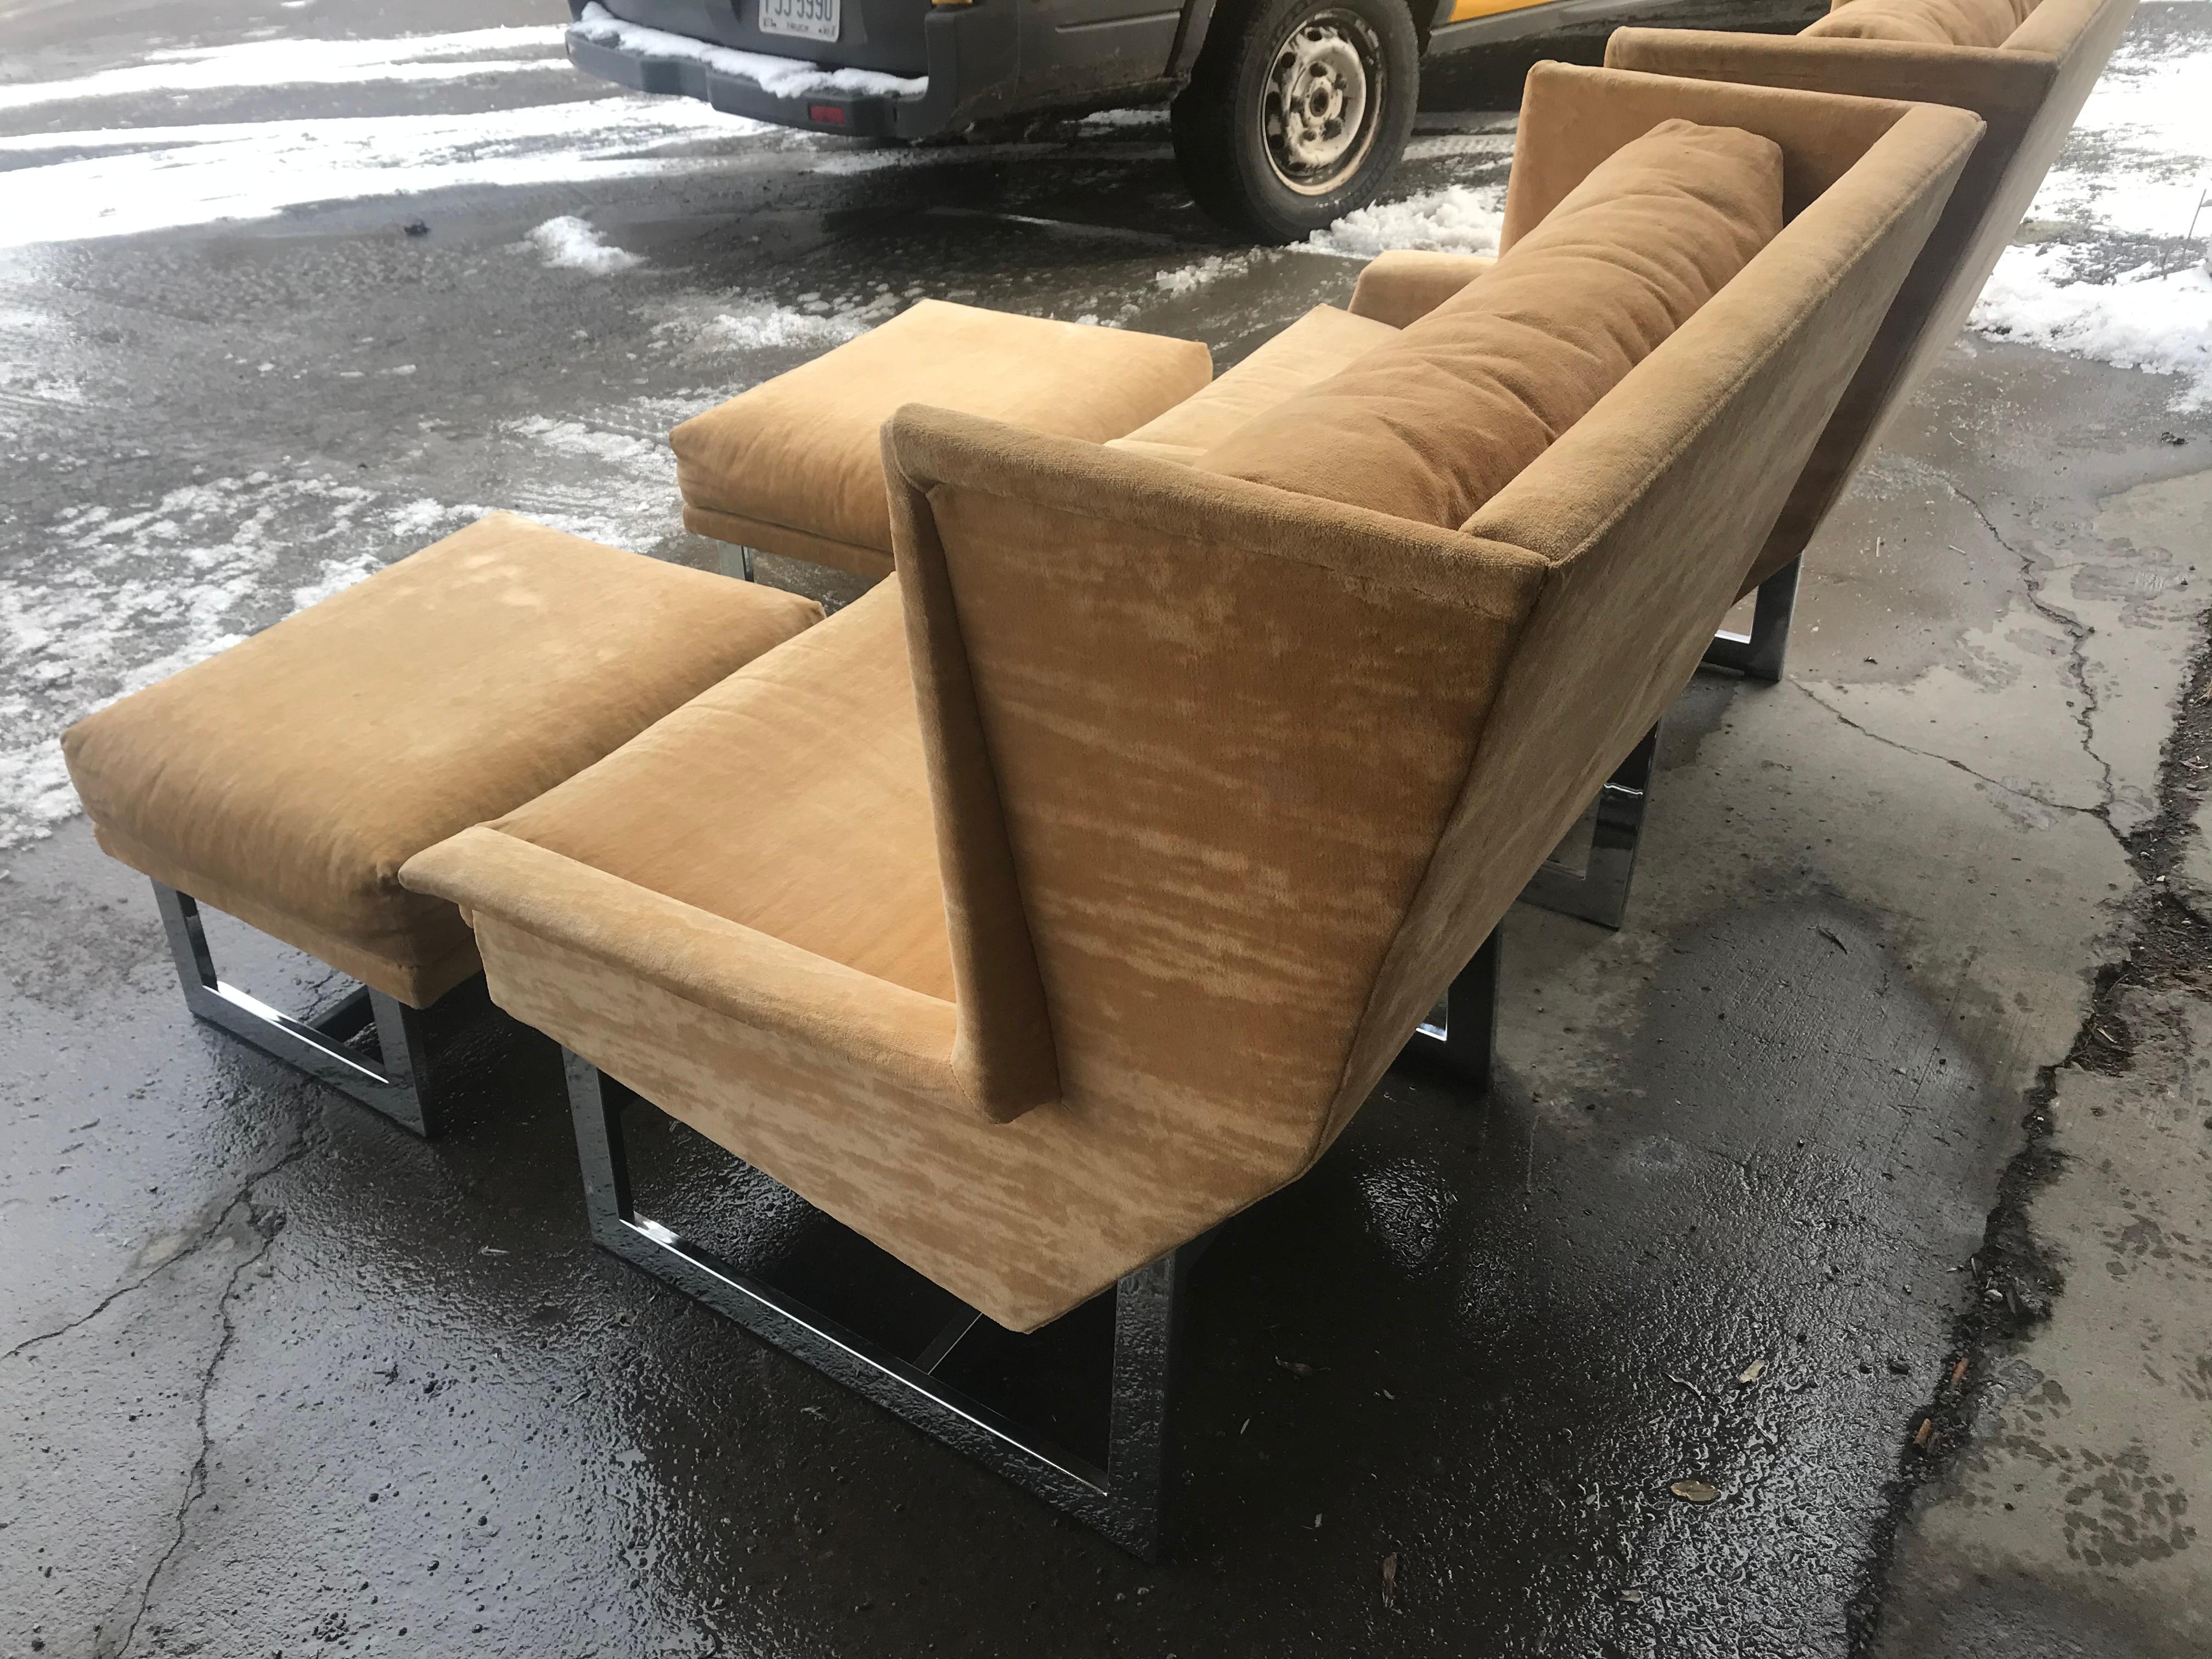 Pair of Adrian Pearsall lounge chairs / ottomans, over scale dramatic forms, Classic modernist design. Exaggerated forms, large wing backs, extremely comfortable. Retain original neutral color velour fabric in useable condition, would be fabulous